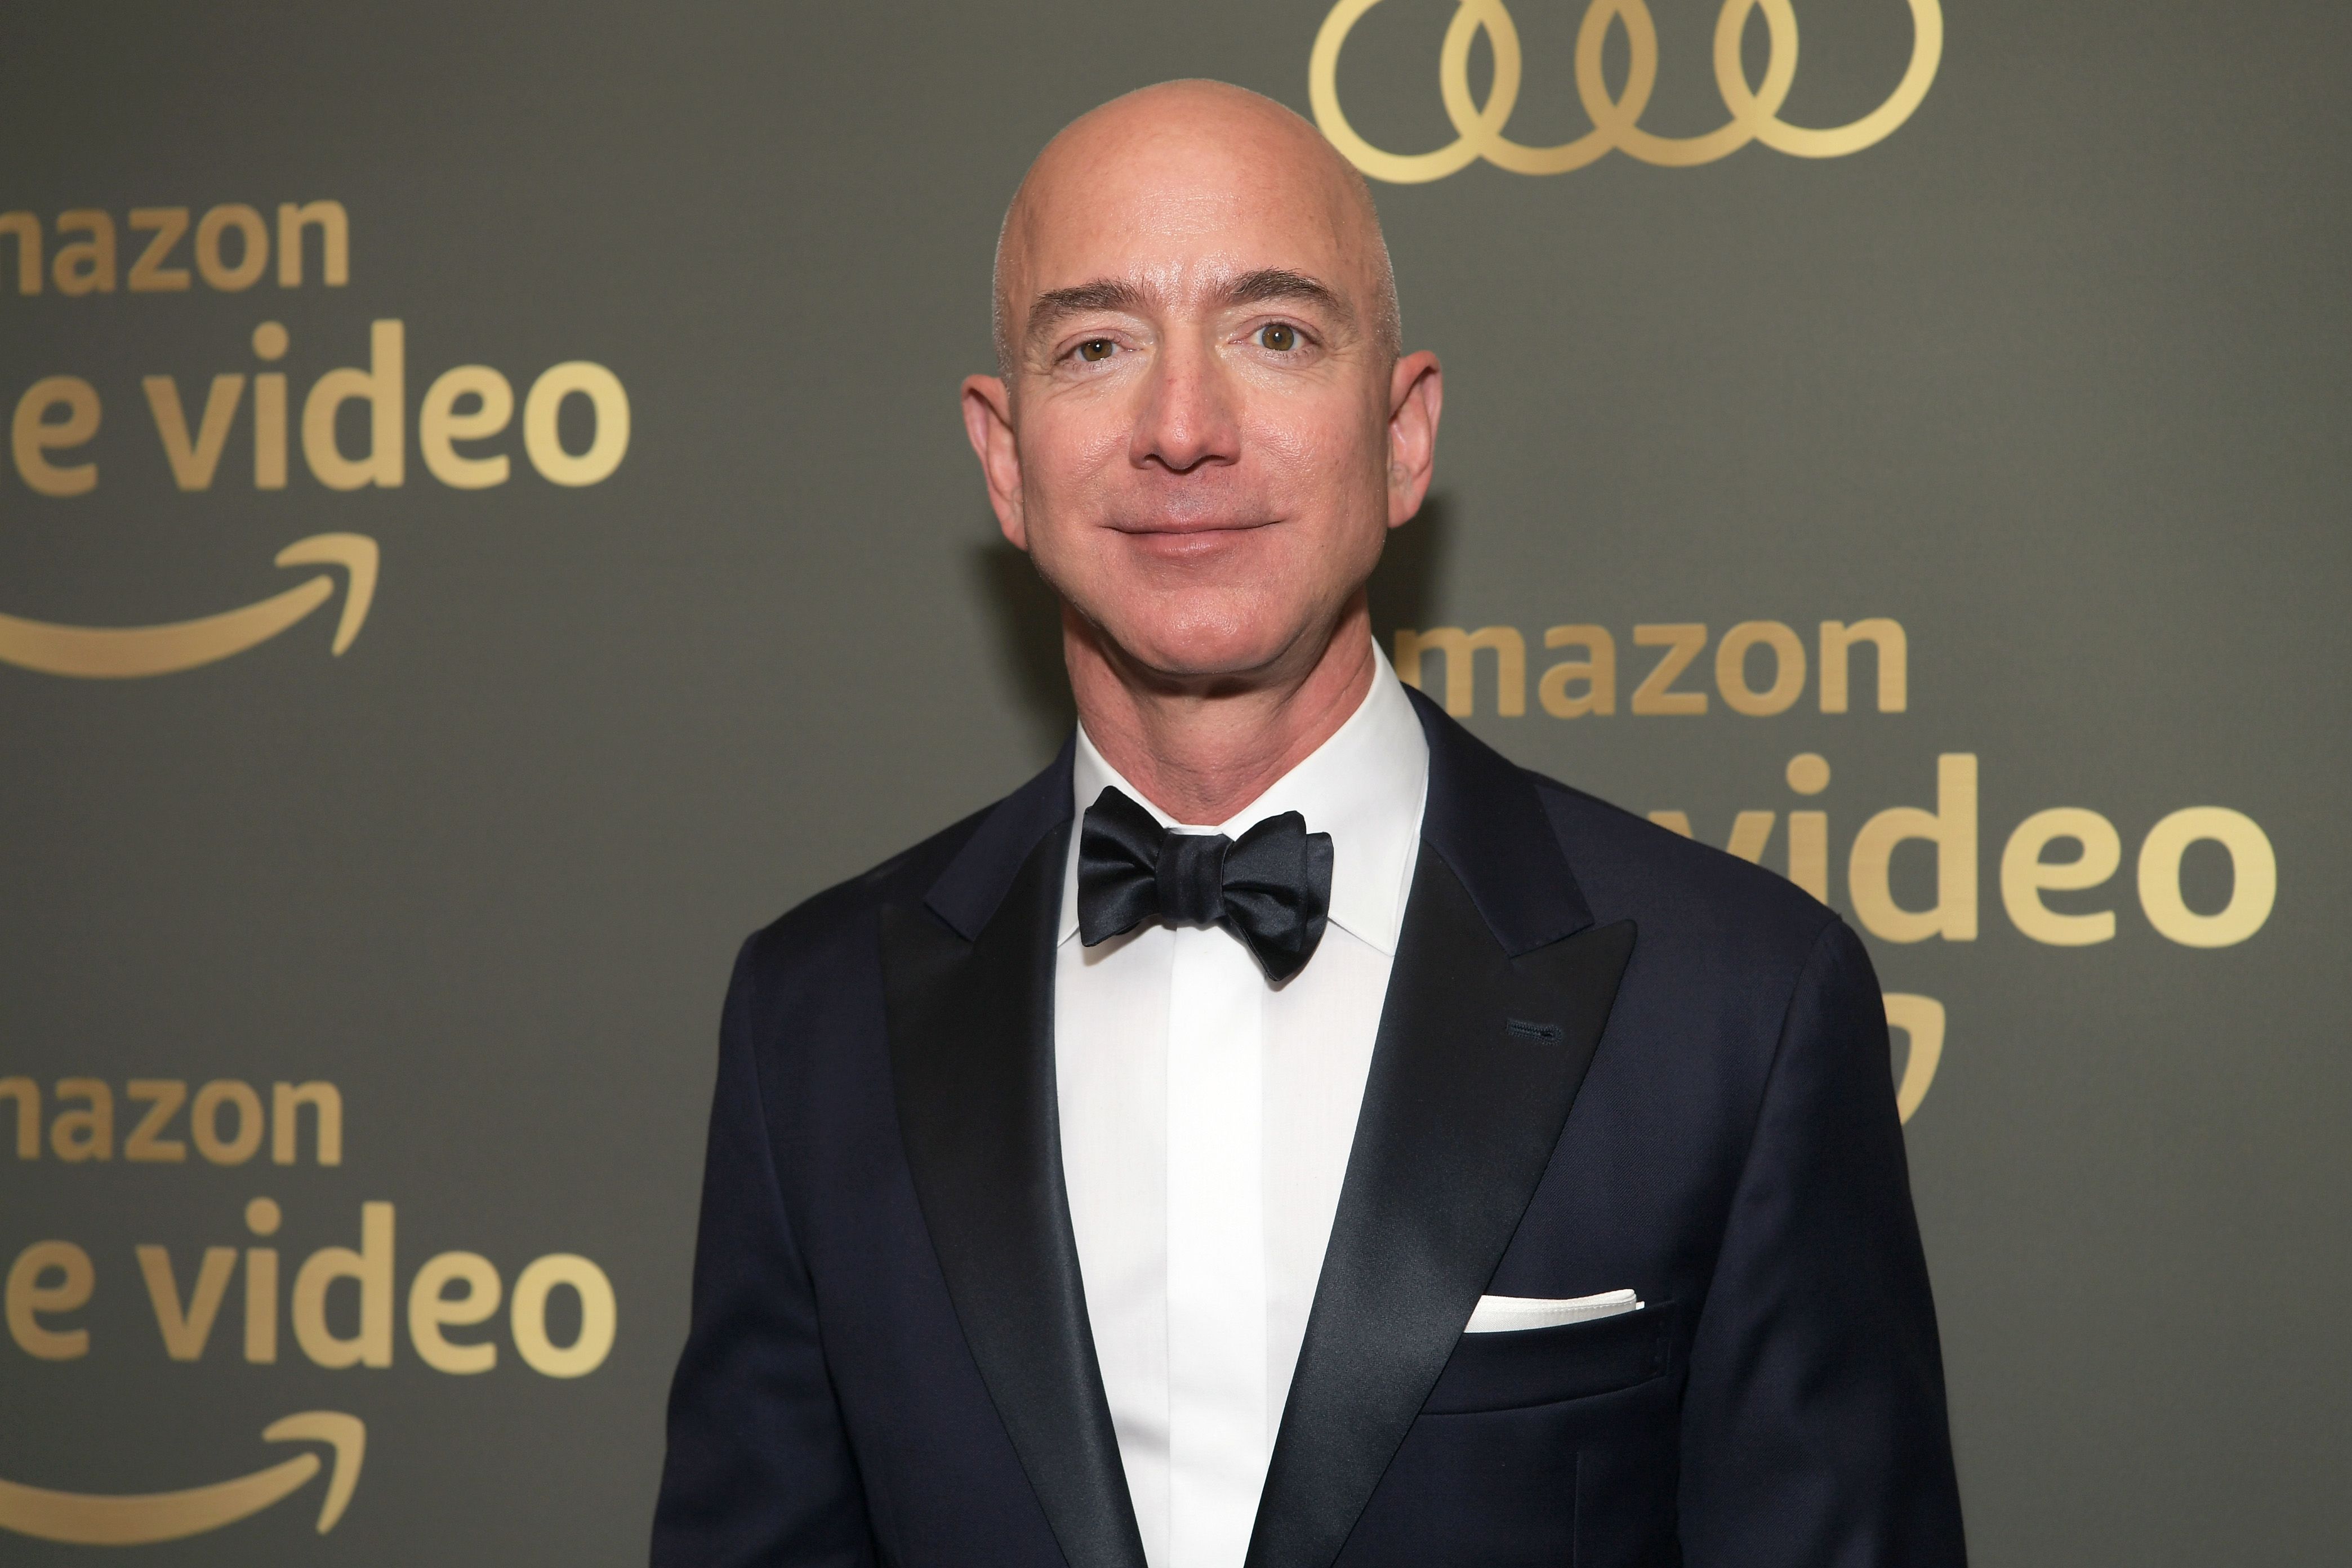 Amazon CEO Jeff Bezos attends the Amazon Prime Video's Golden Globe Awards After Party in Beverly Hills, Calif., on Jan. 6, 2019.